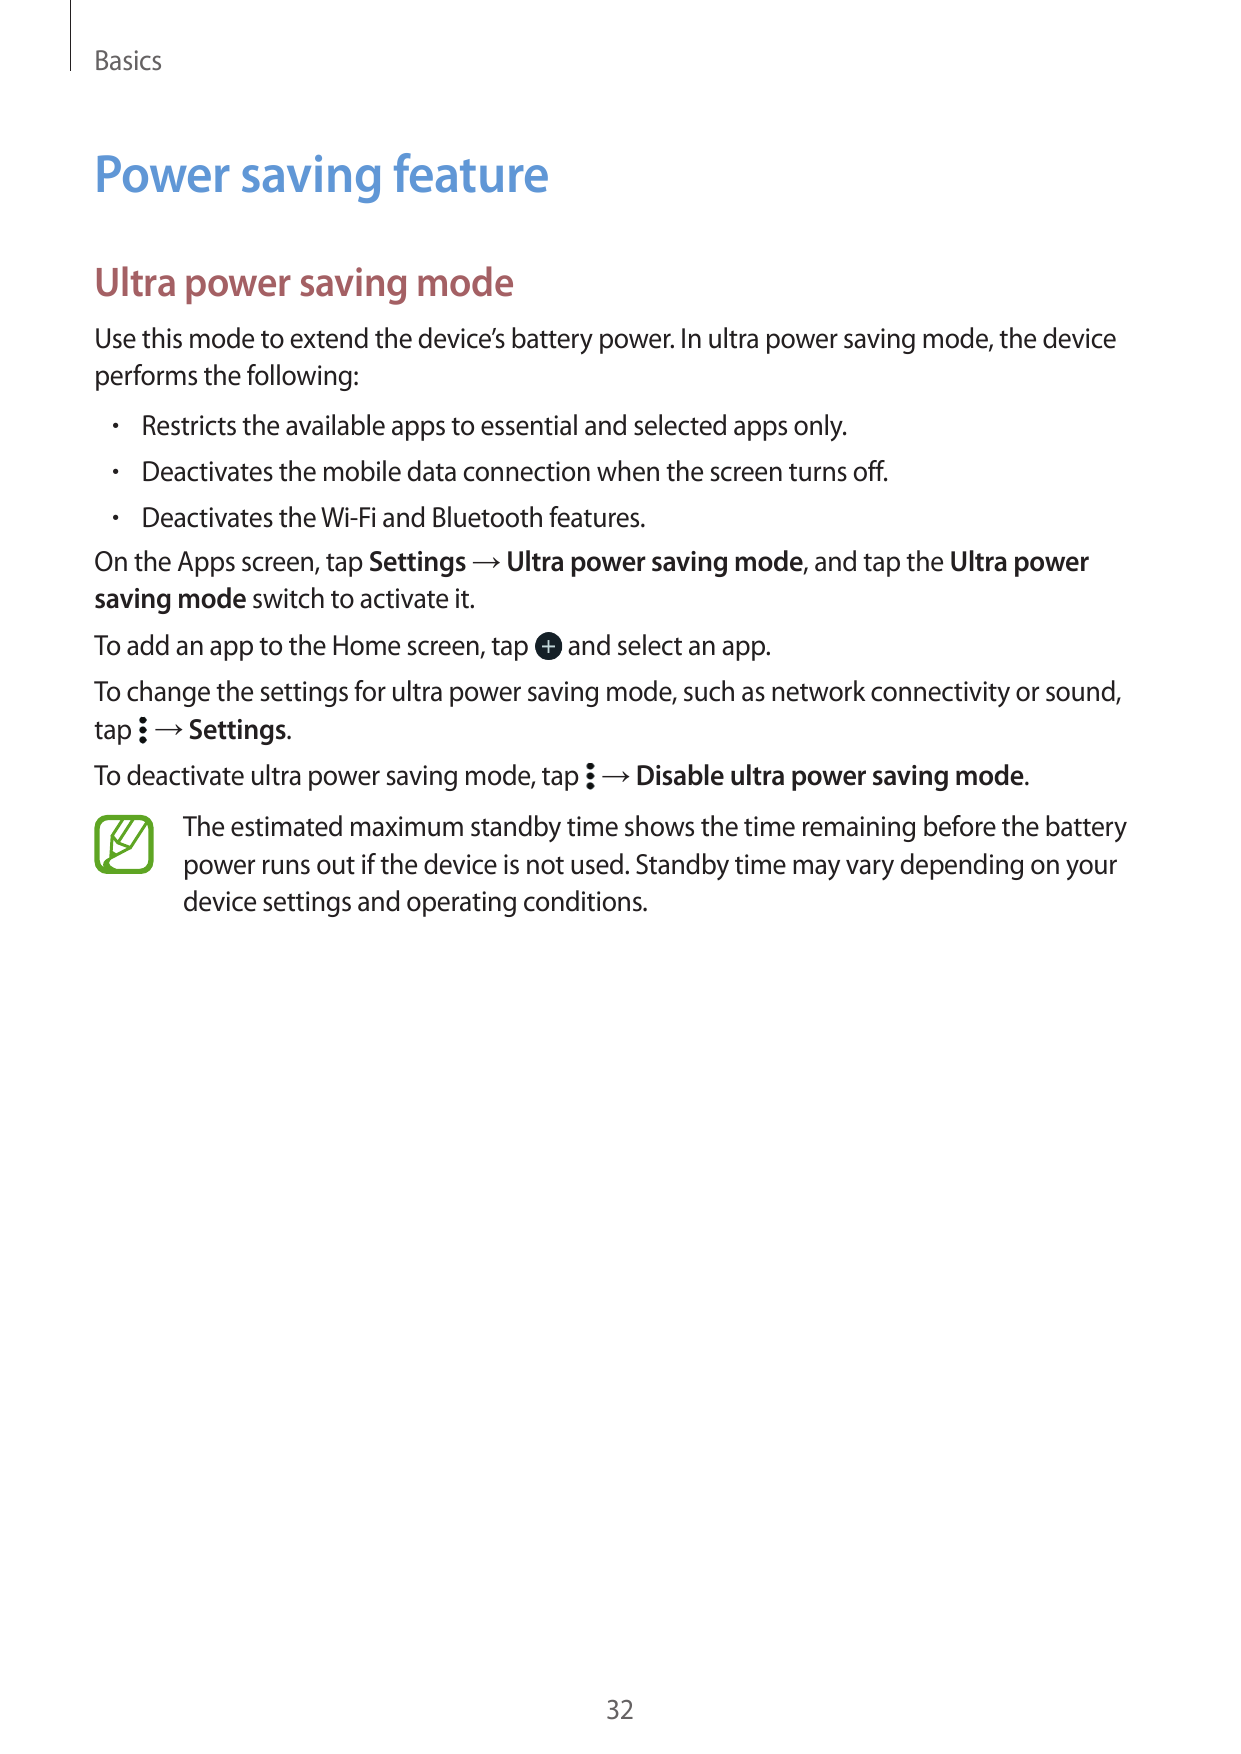 BasicsPower saving featureUltra power saving modeUse this mode to extend the device’s battery power. In ultra power saving mode,